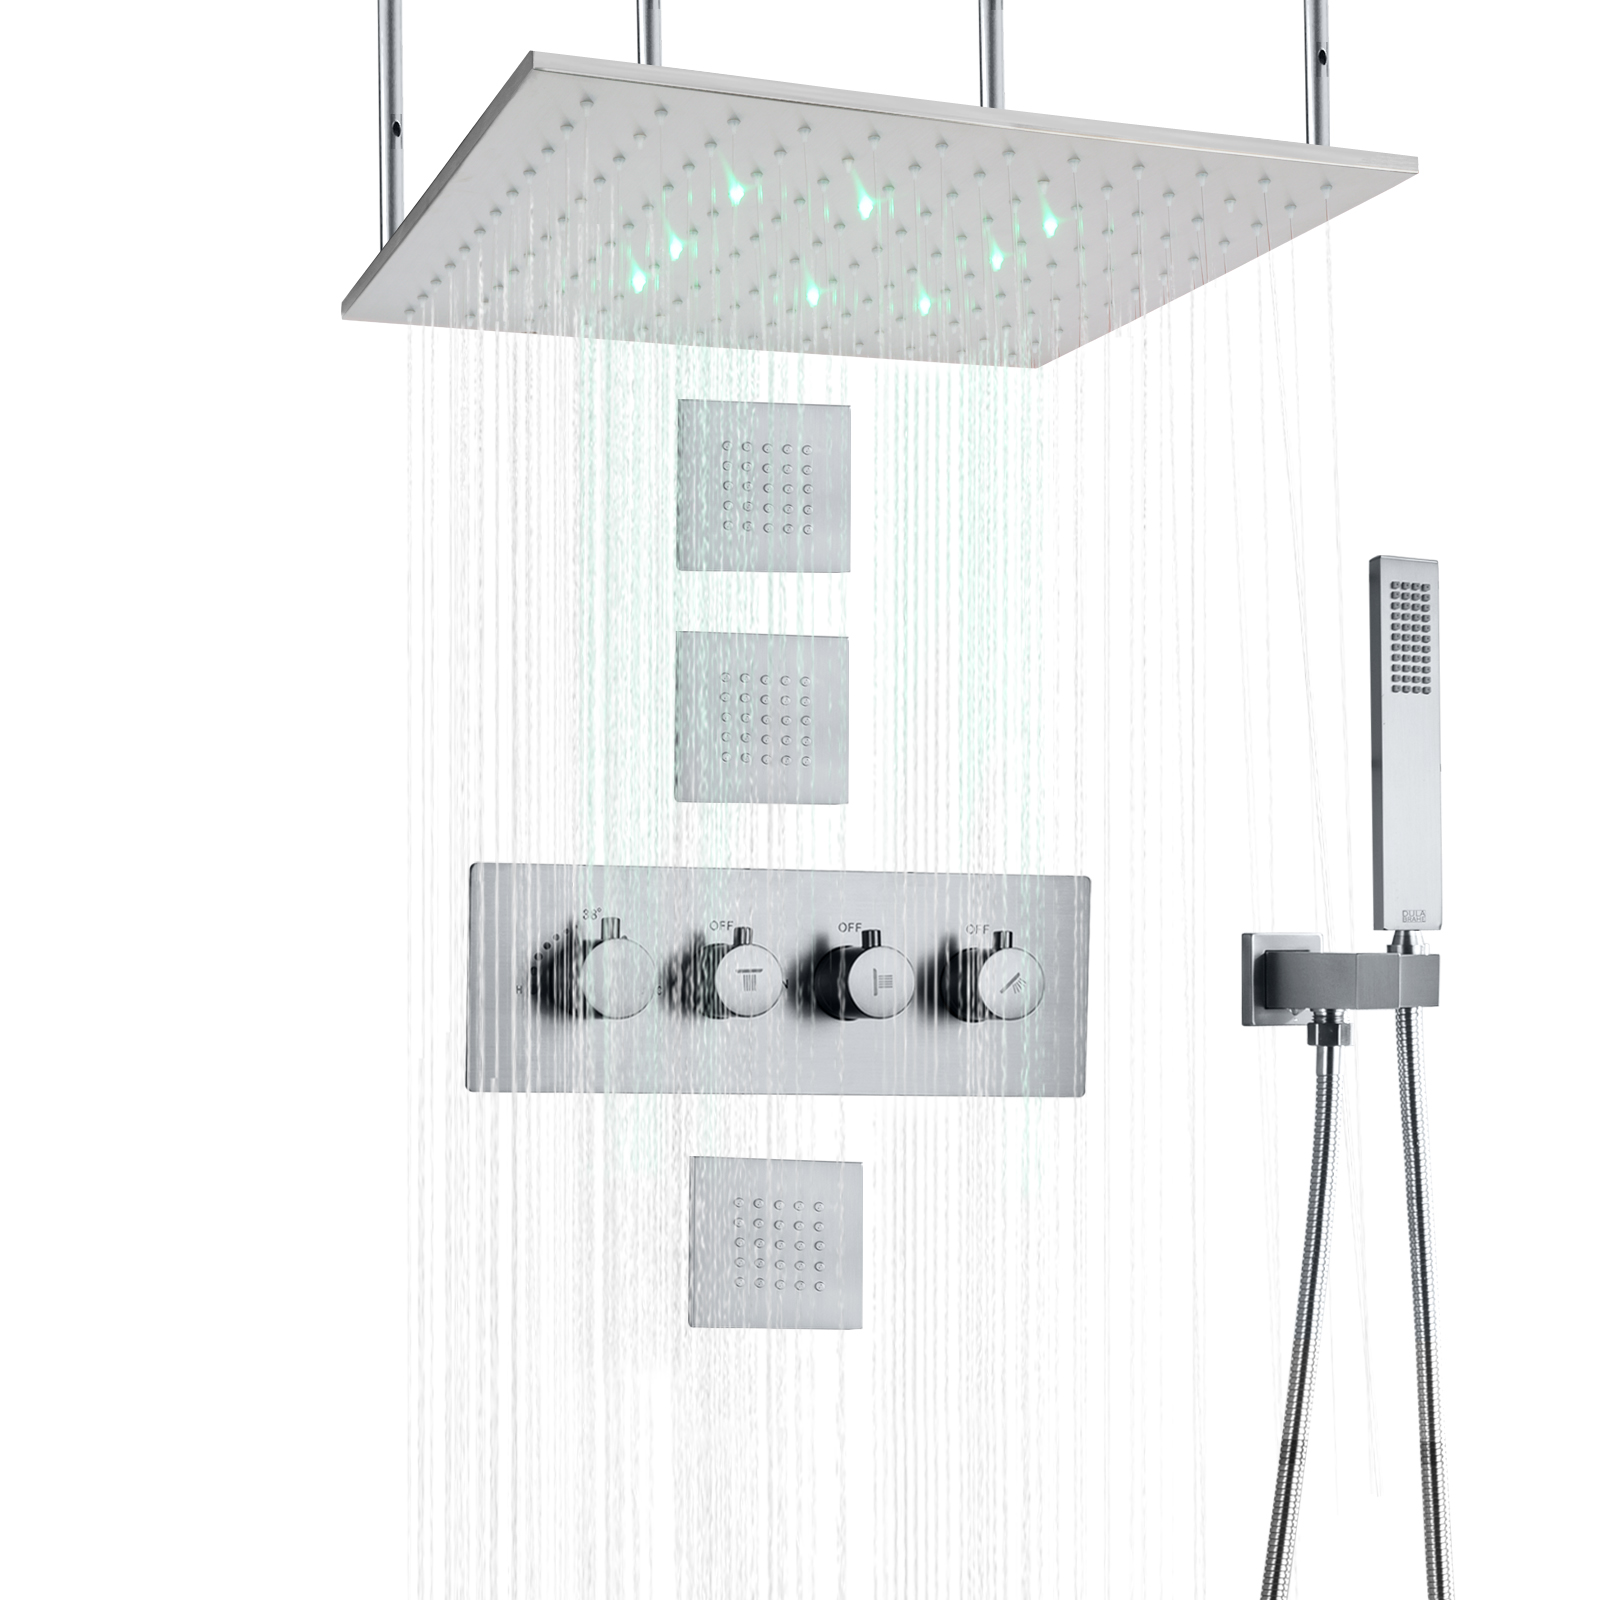 16 Inch Brushed Nickel Thermostatic LED Bathroom Shower Faucets Wall Rainfall Handheld Douche Spa